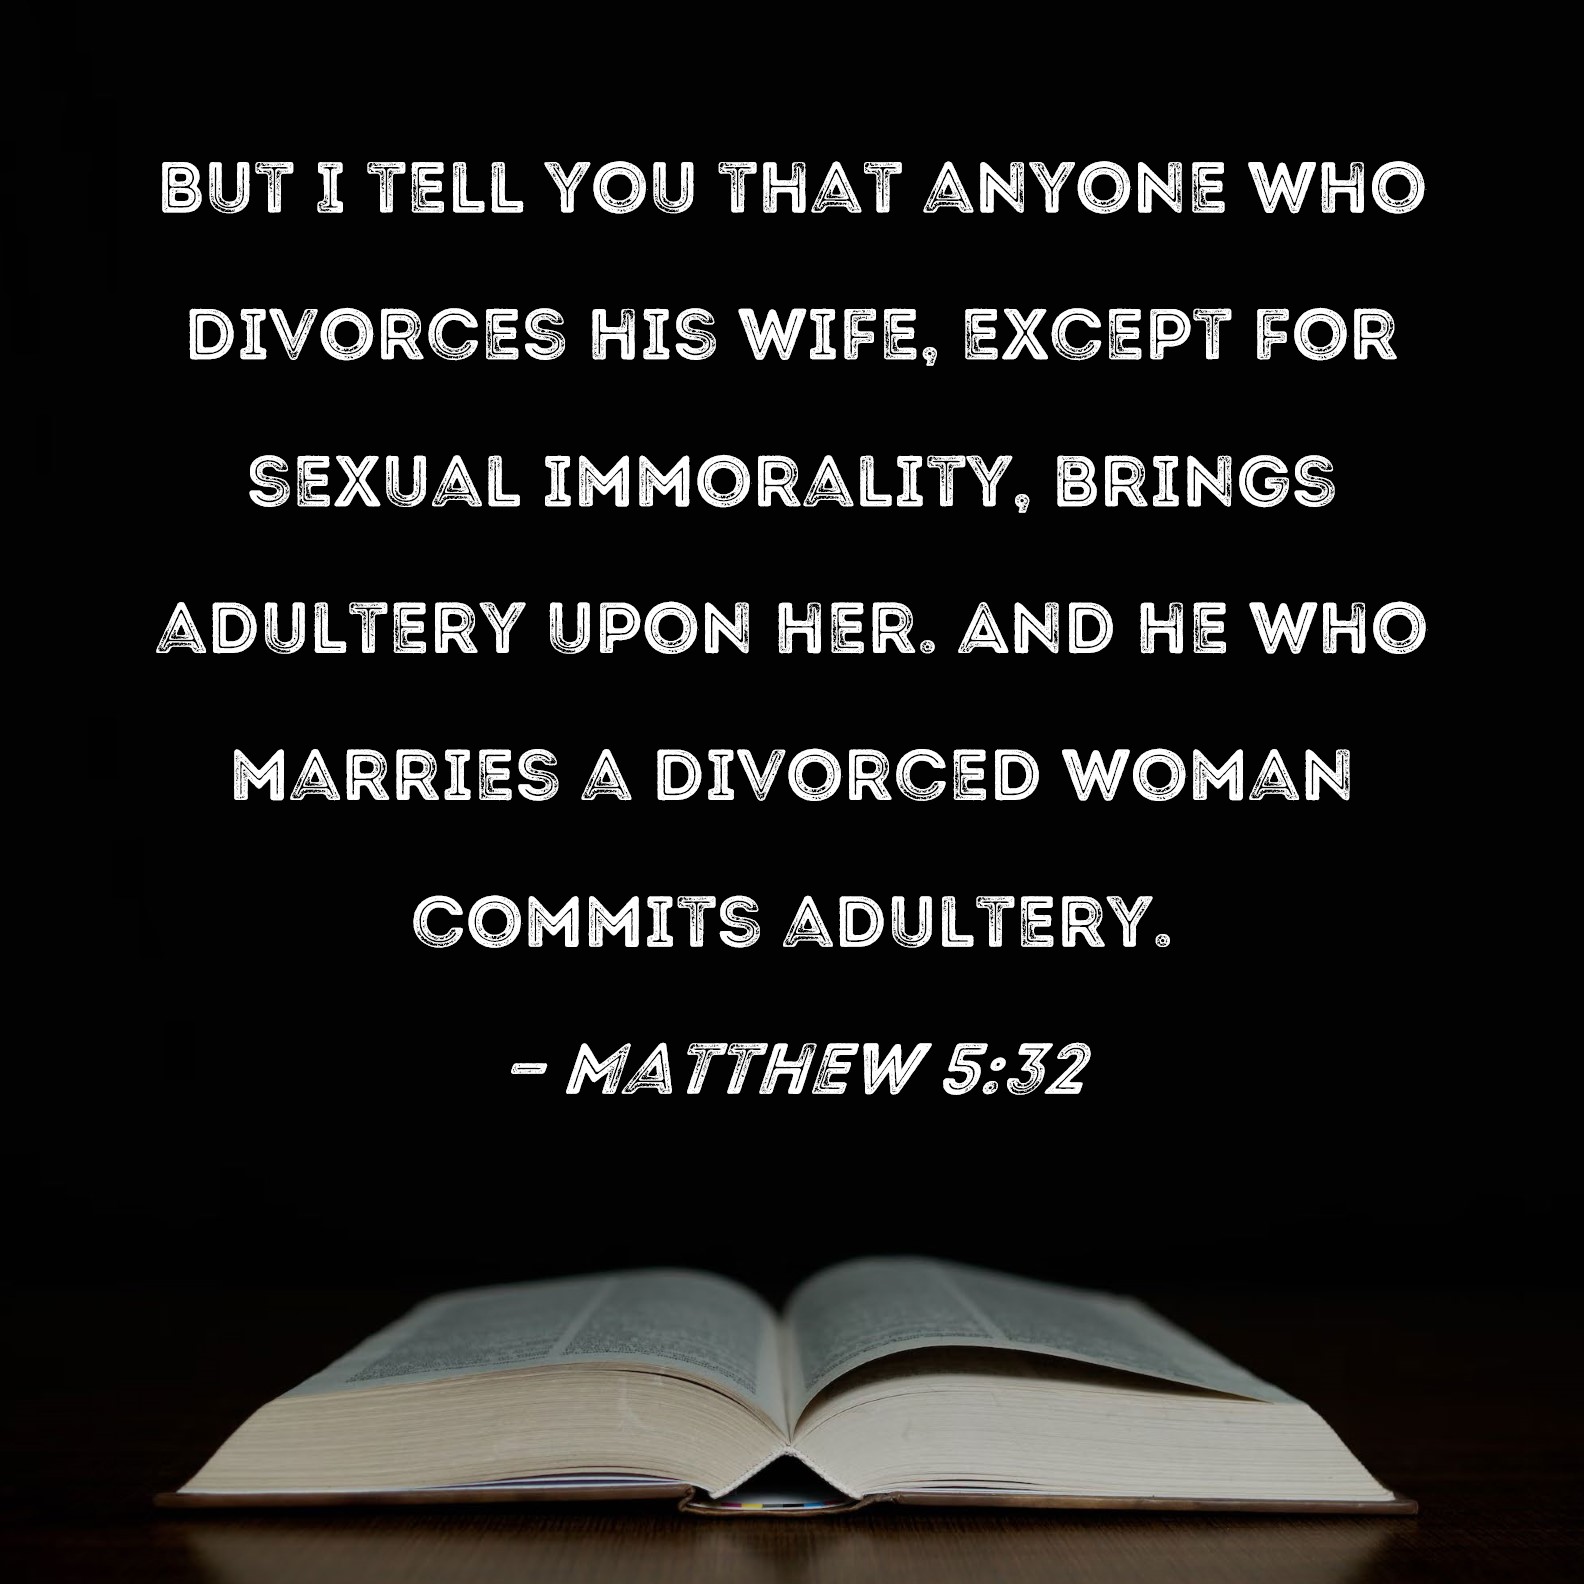 Matthew 532 But I tell you that anyone who divorces his wife, except for sexual immorality, brings adultery upon